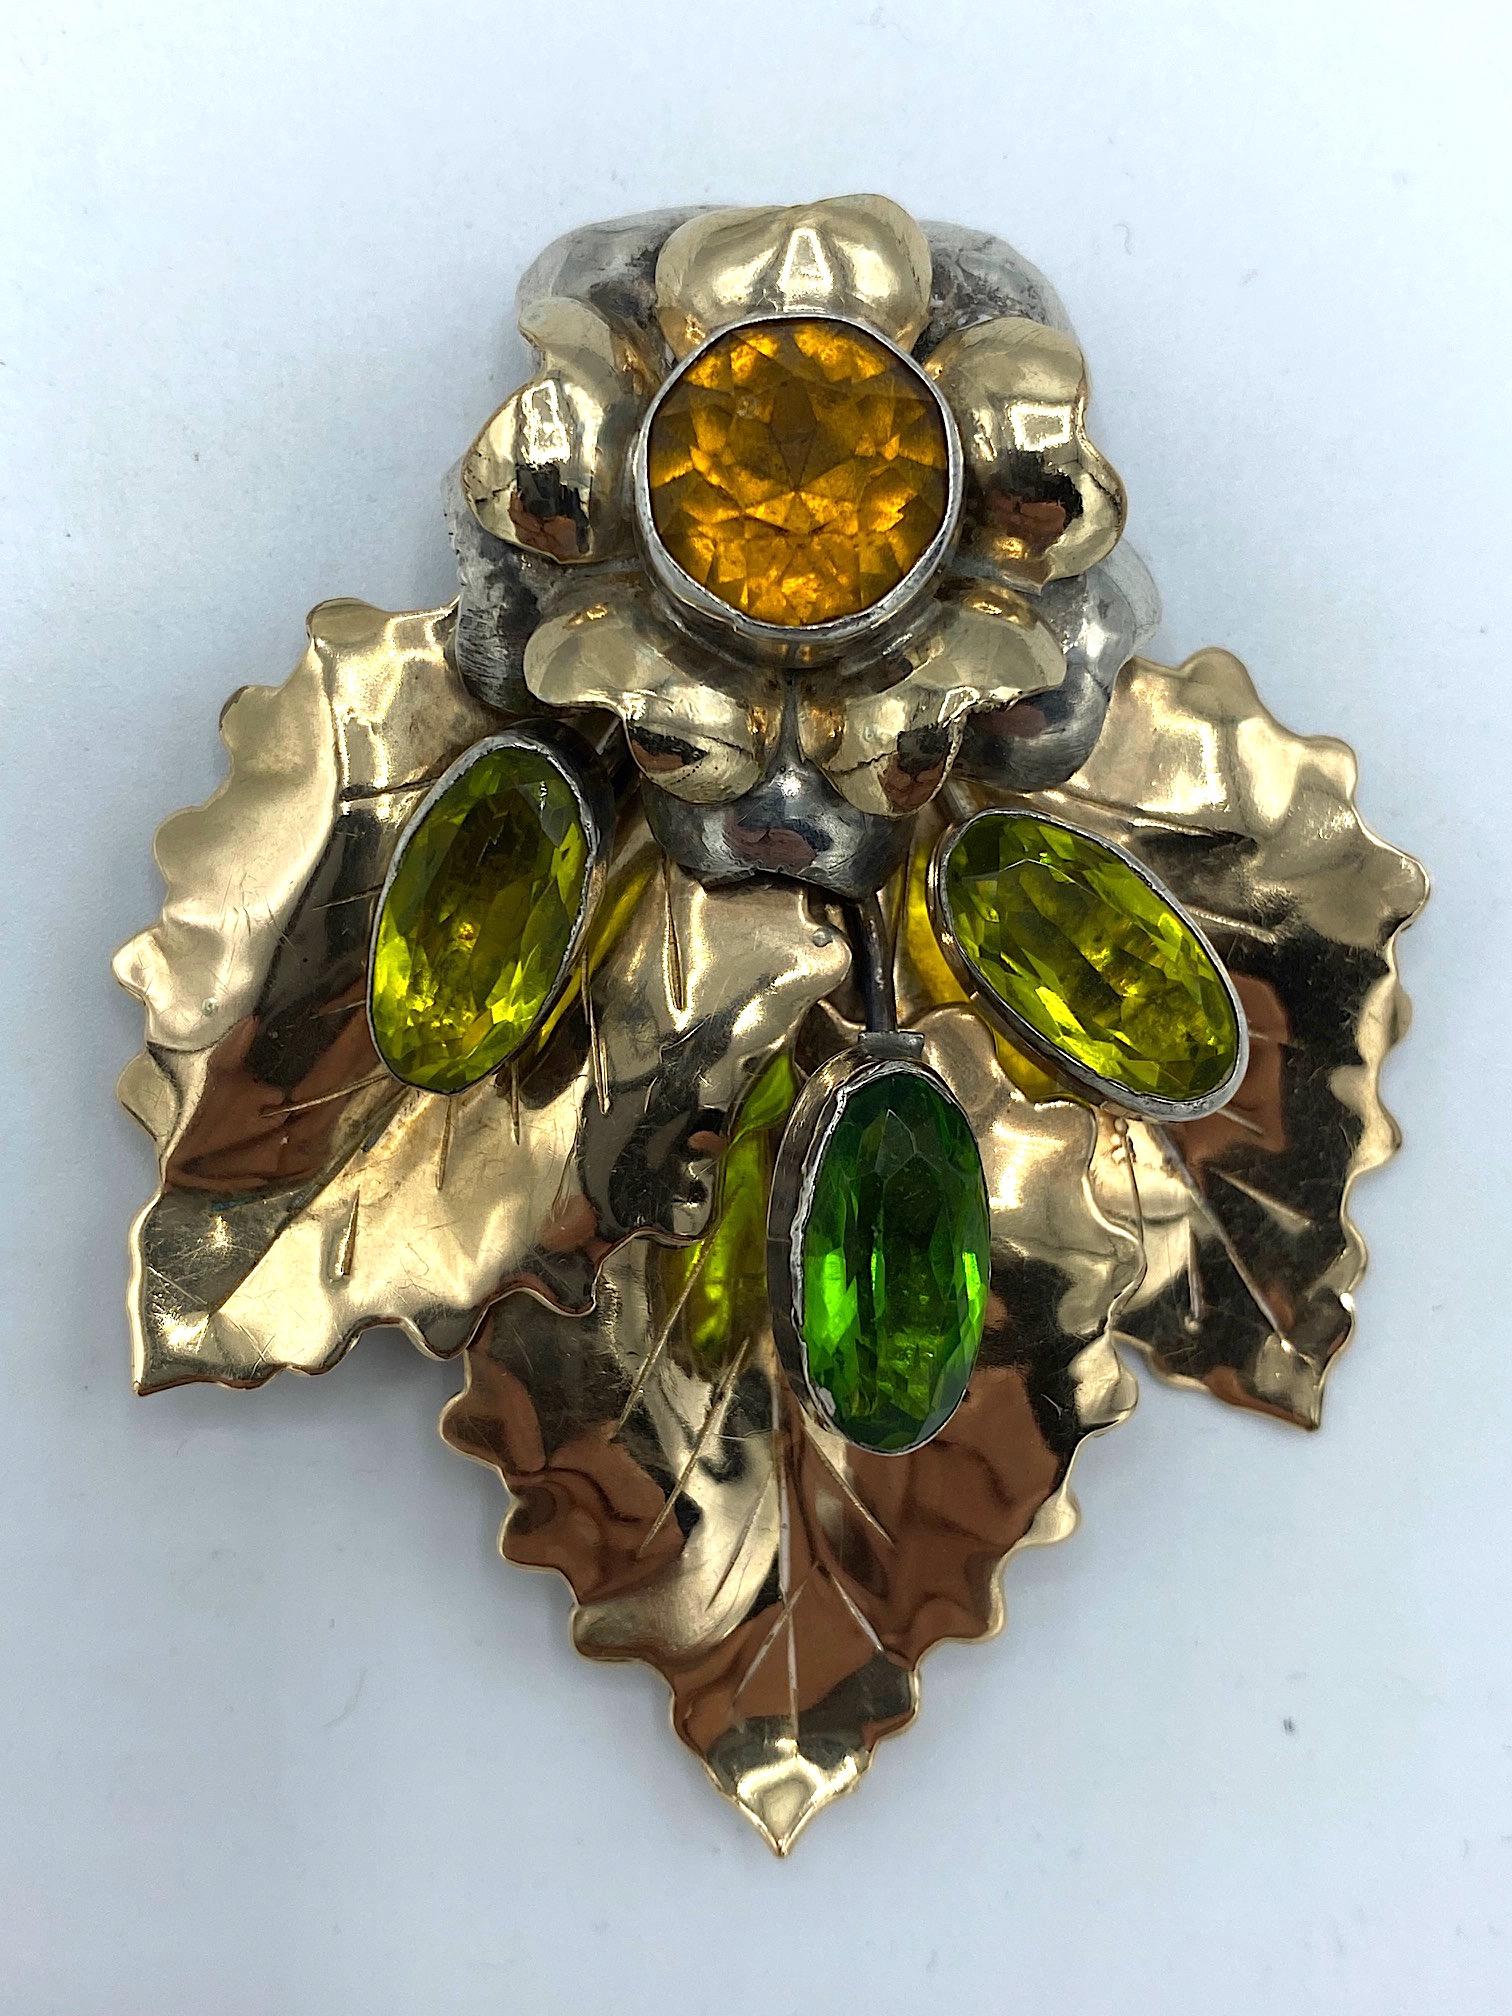 

A beautiful sterling silver floral brooch by jewelry company Hobe' and made between 1941 and 1948. The brooch is hand soldered with a three dimensional top flower in sterling silver and a central bezel set gold gold crystal stone. Extending down